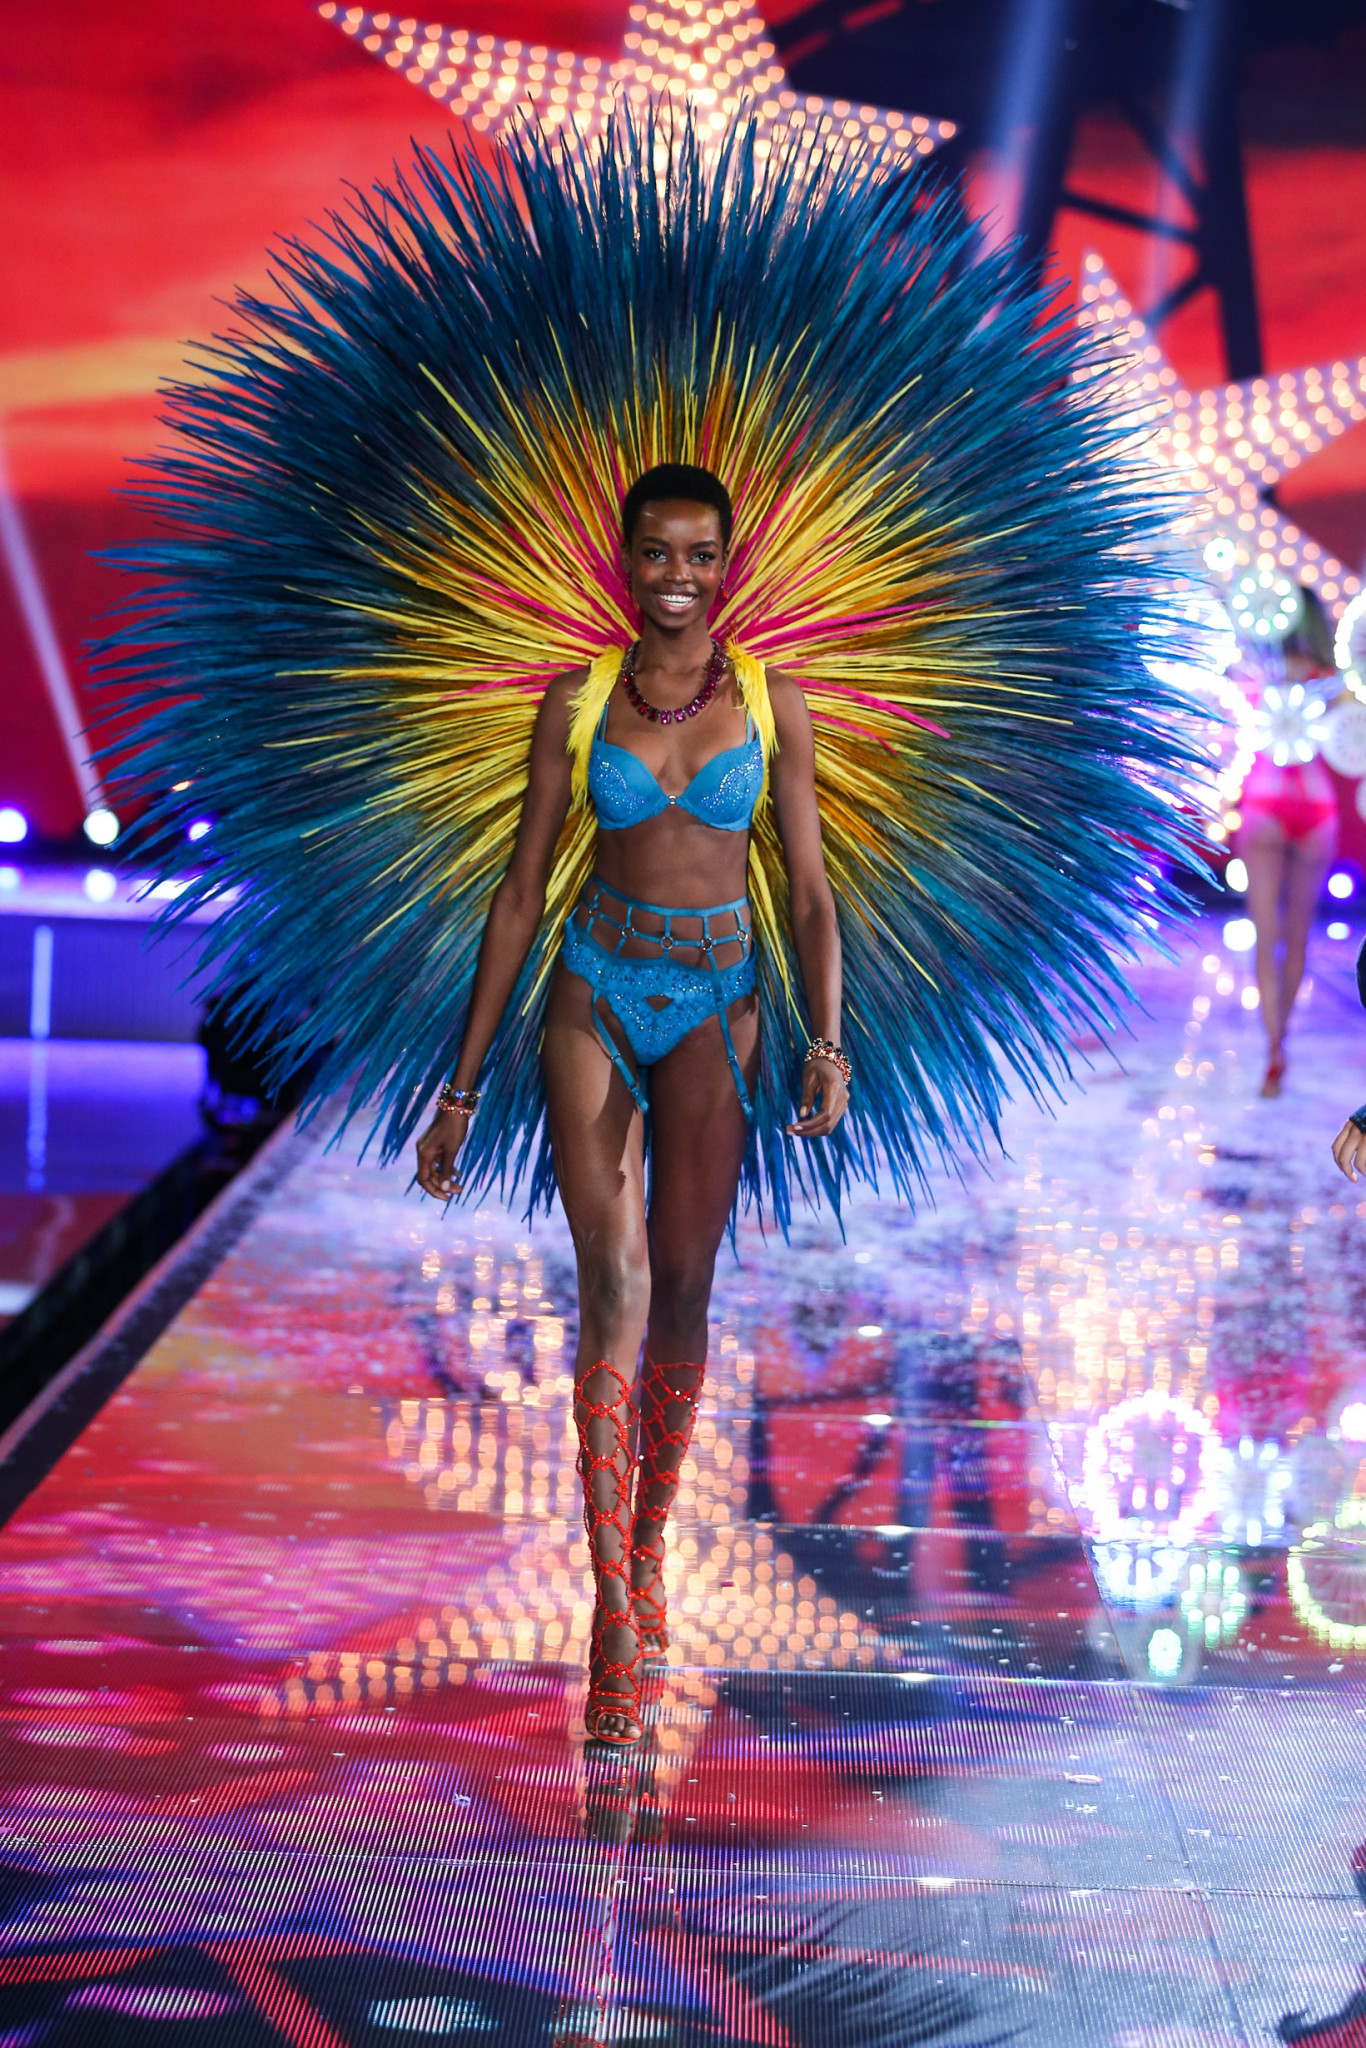 Maria walks the runway at the 2015 Victoria's Secret Fashion Show in New York City on November 10th, 2015